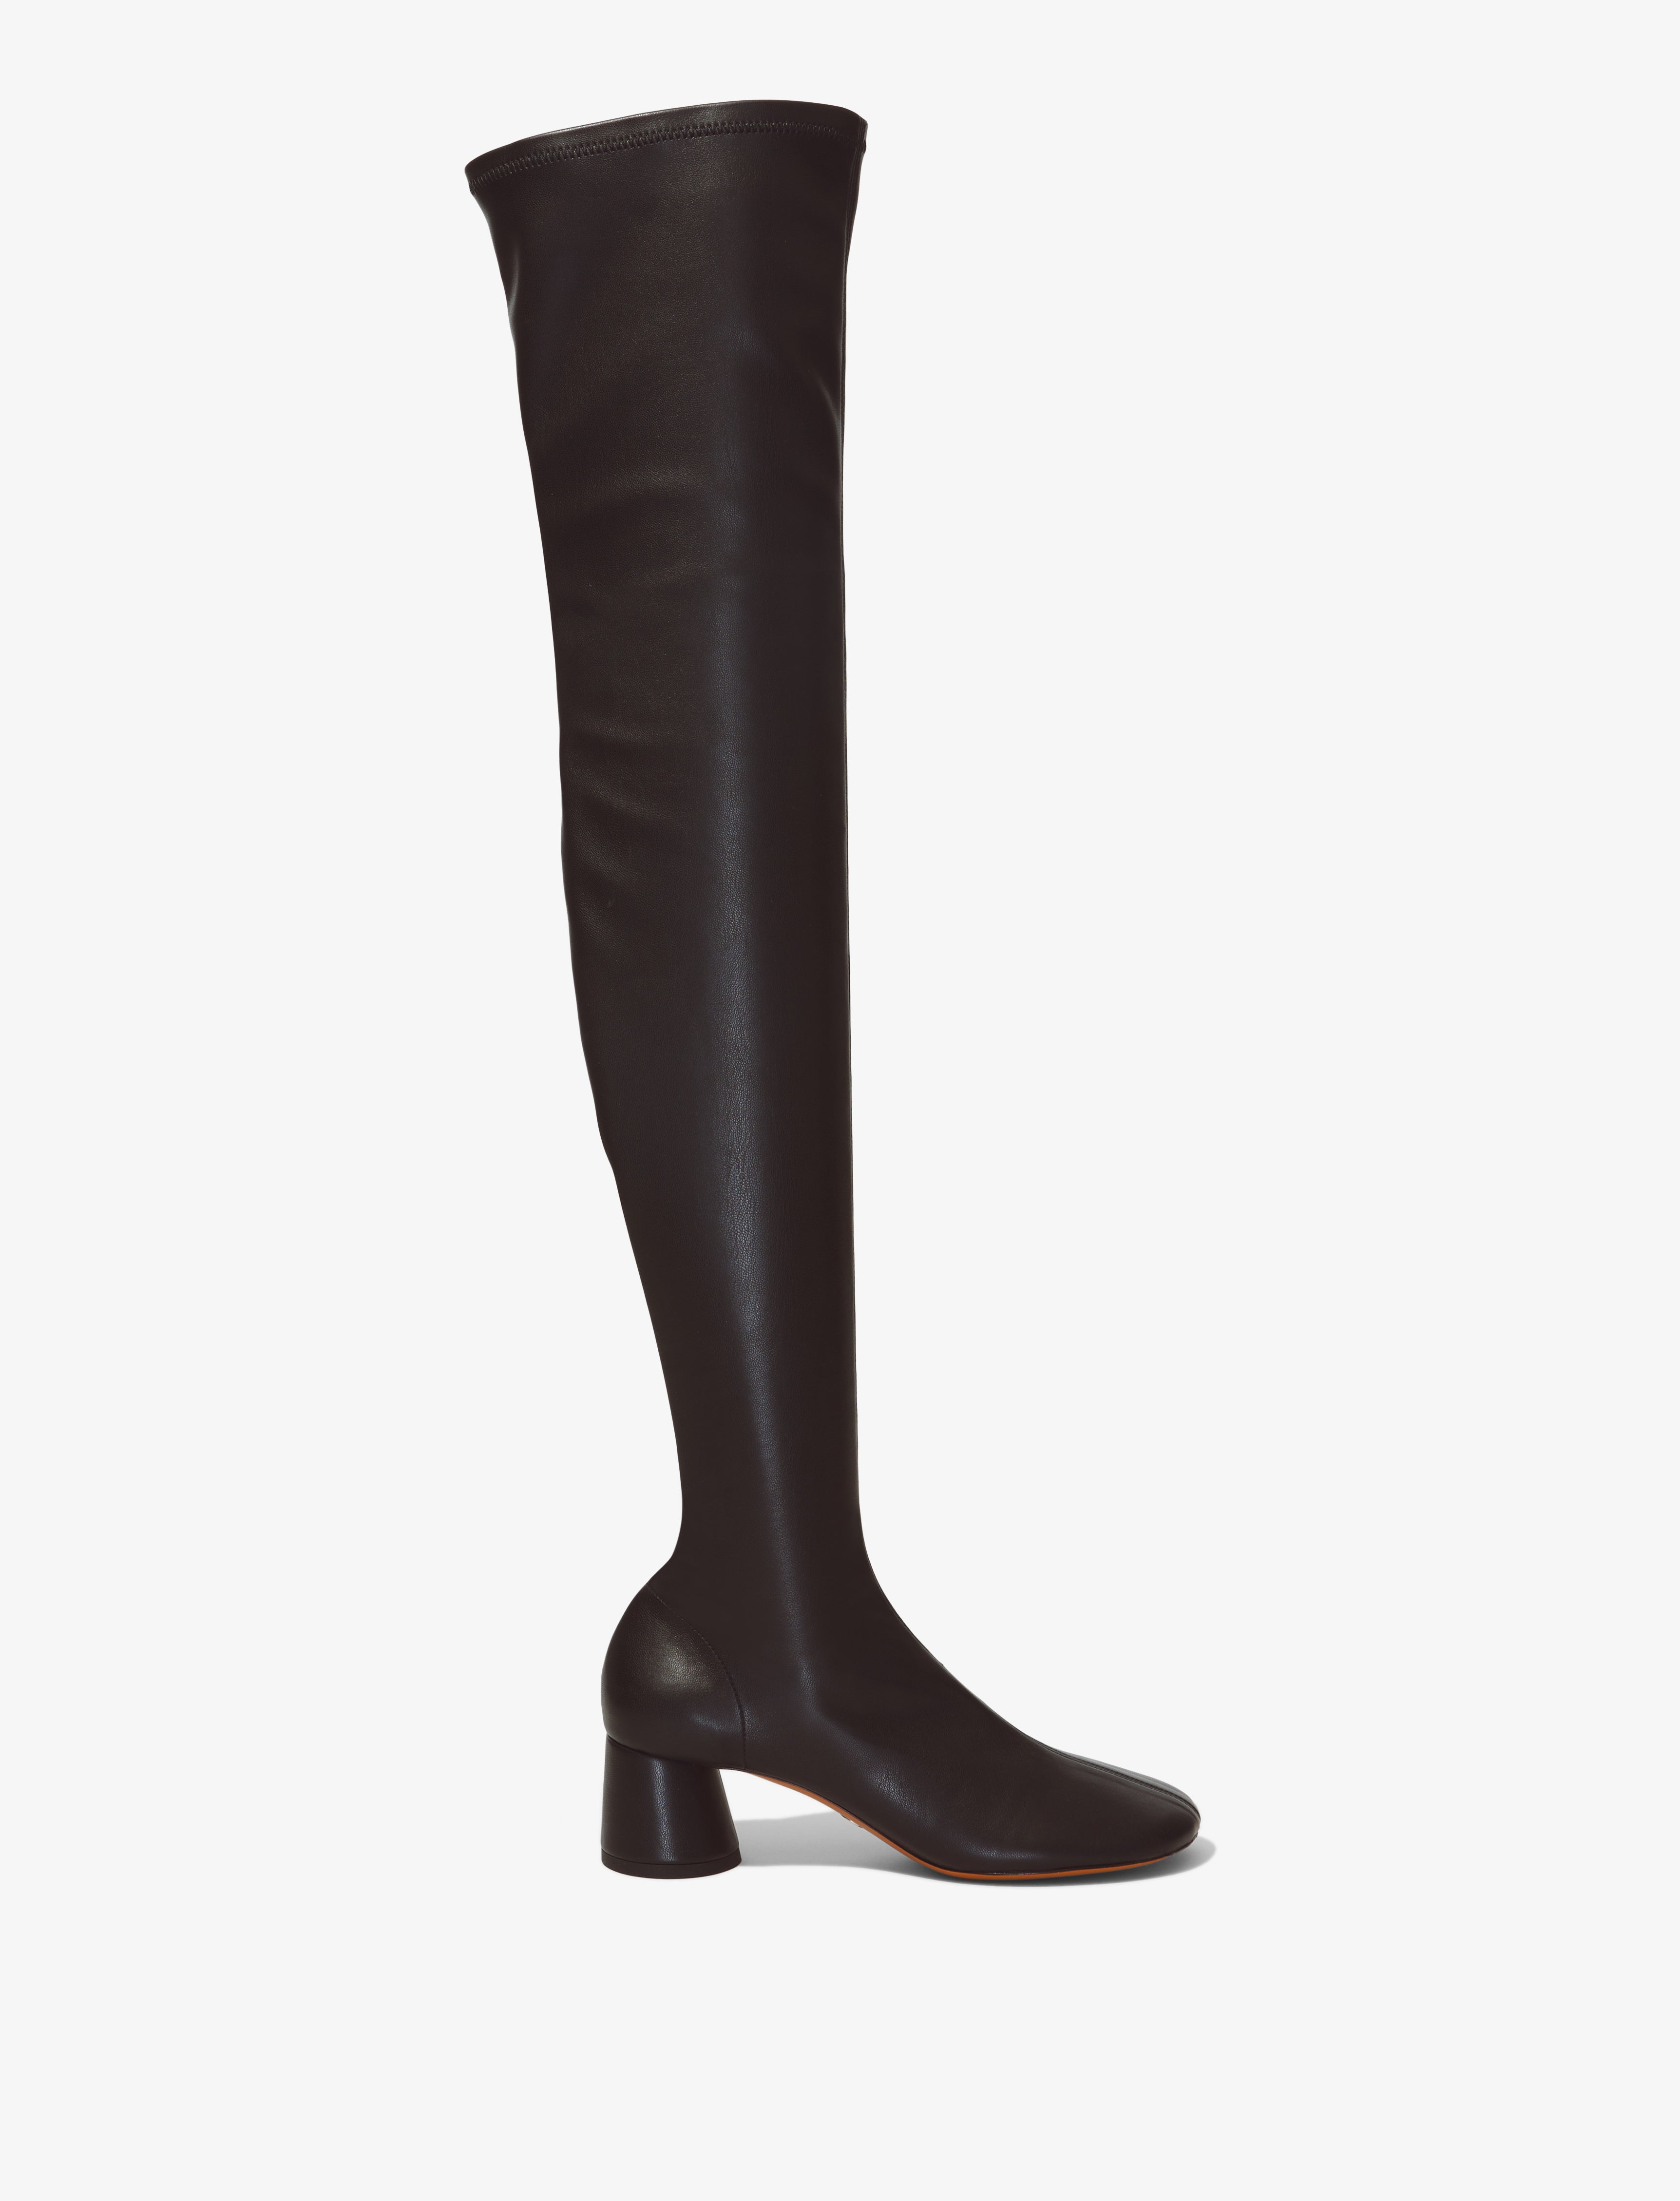 Glove Stretch Over The Knee Boots – Proenza Schouler